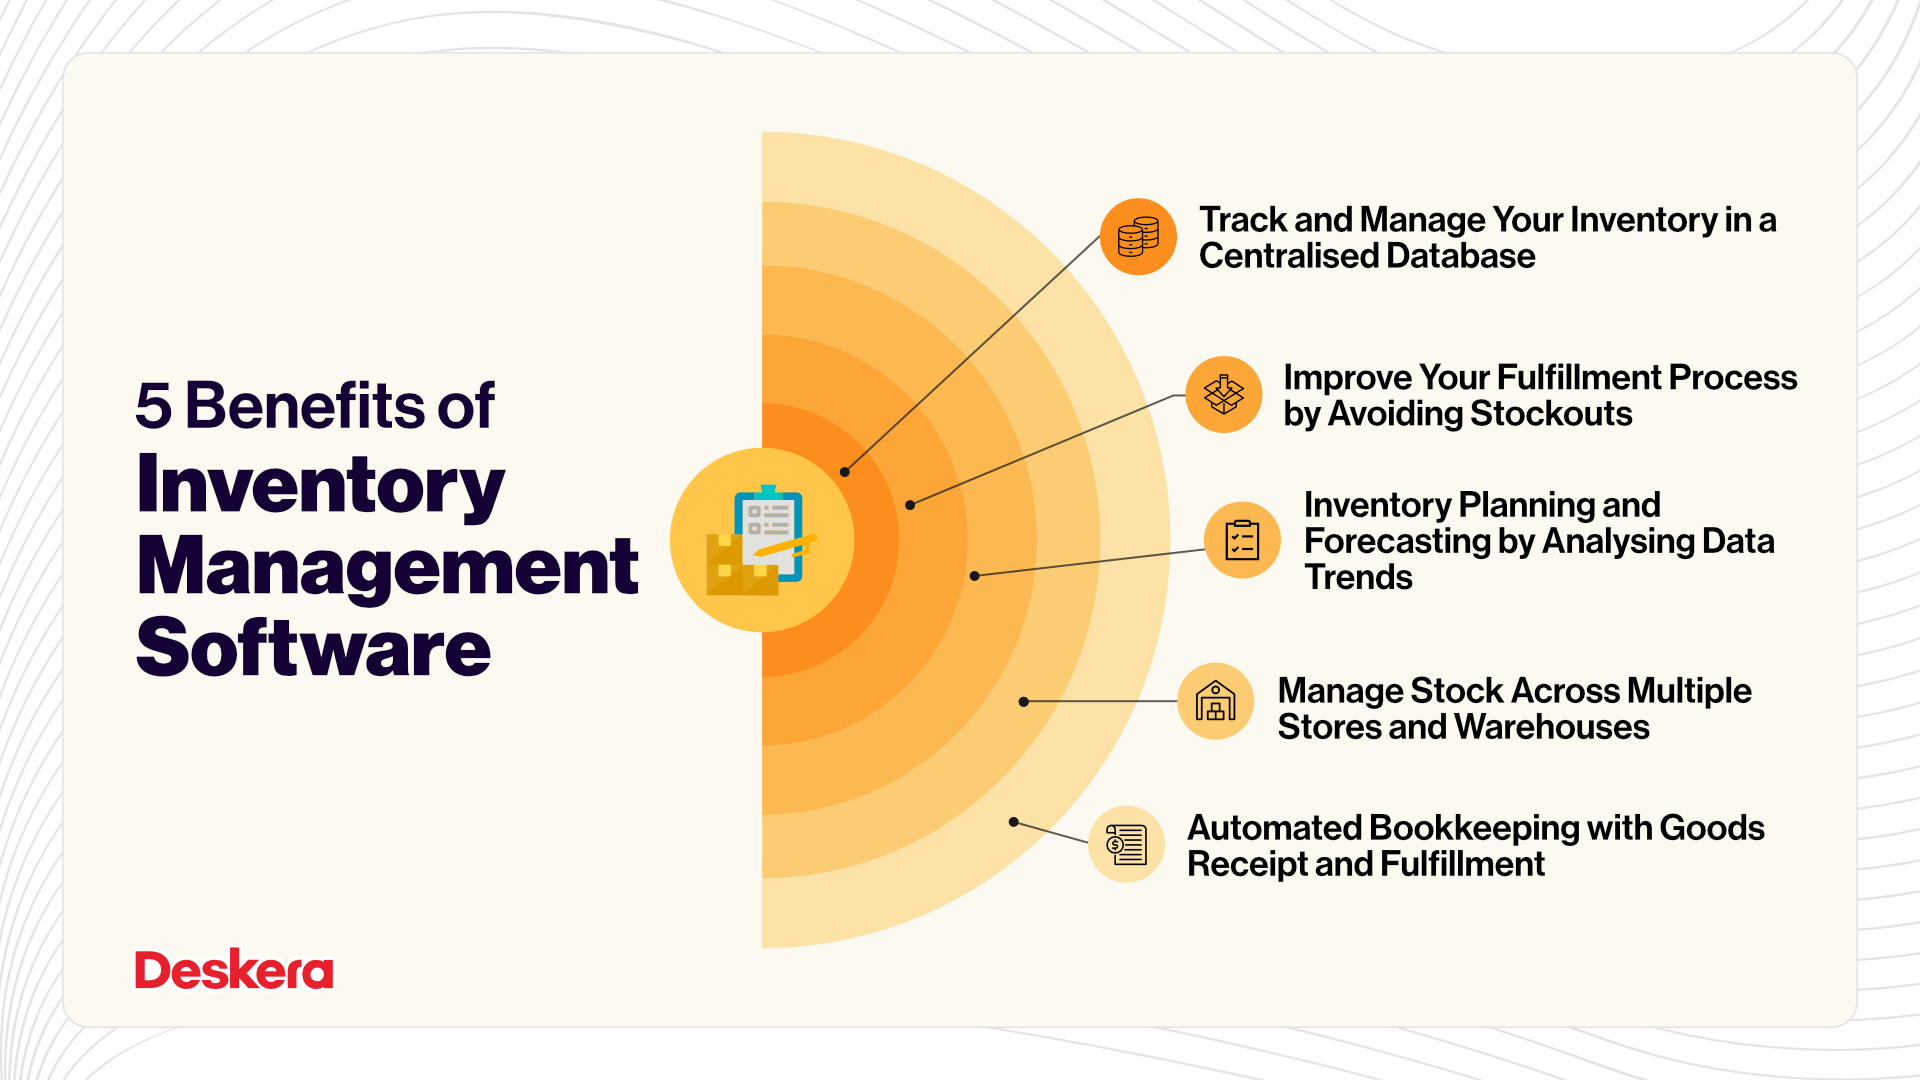 Benefits of Inventory Management Software